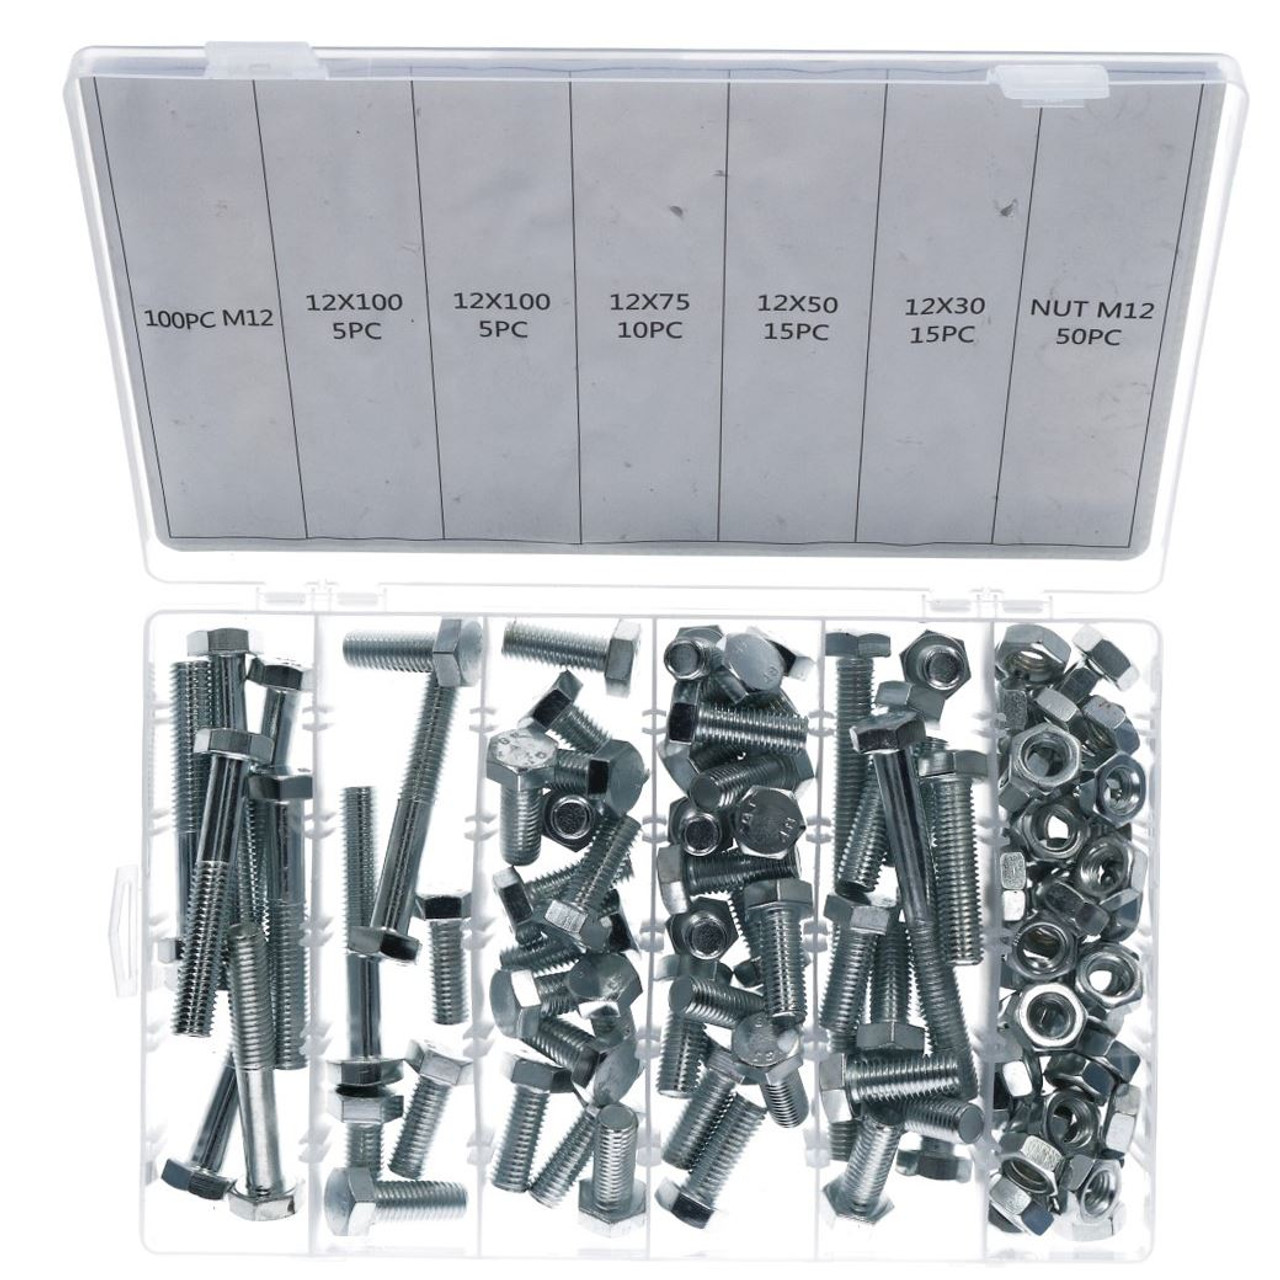 100pc M12 12mm Bolts Bolt with Nuts Assortment 30 100mm Hex Head AB  Tools Online